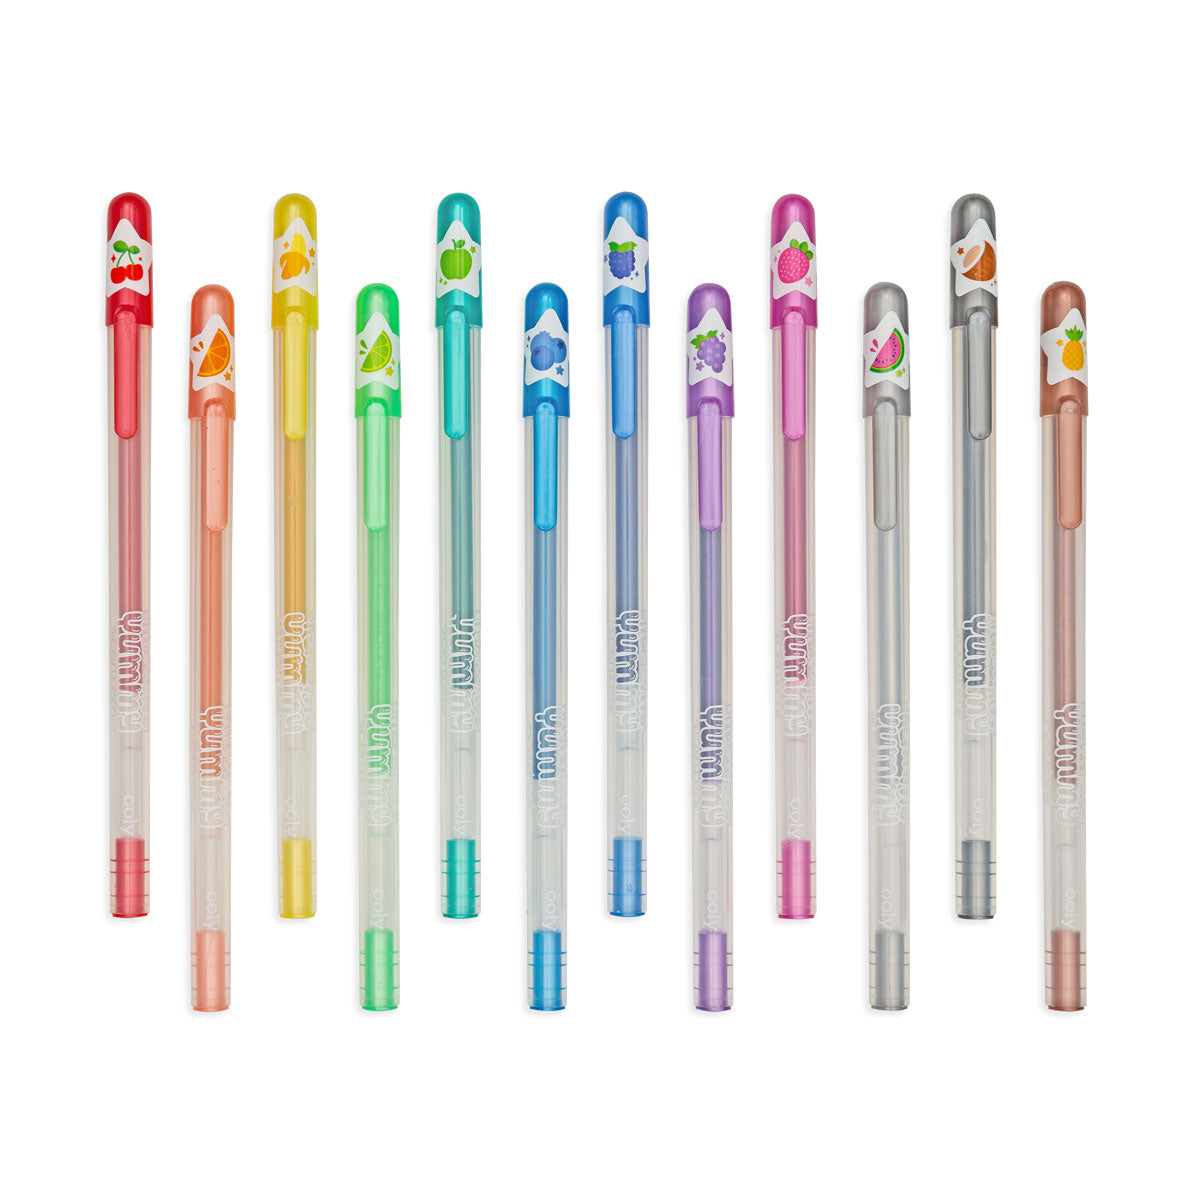 Ooly Yummy Yummy Scented Glitter Gel Pens - Time 4 Toys